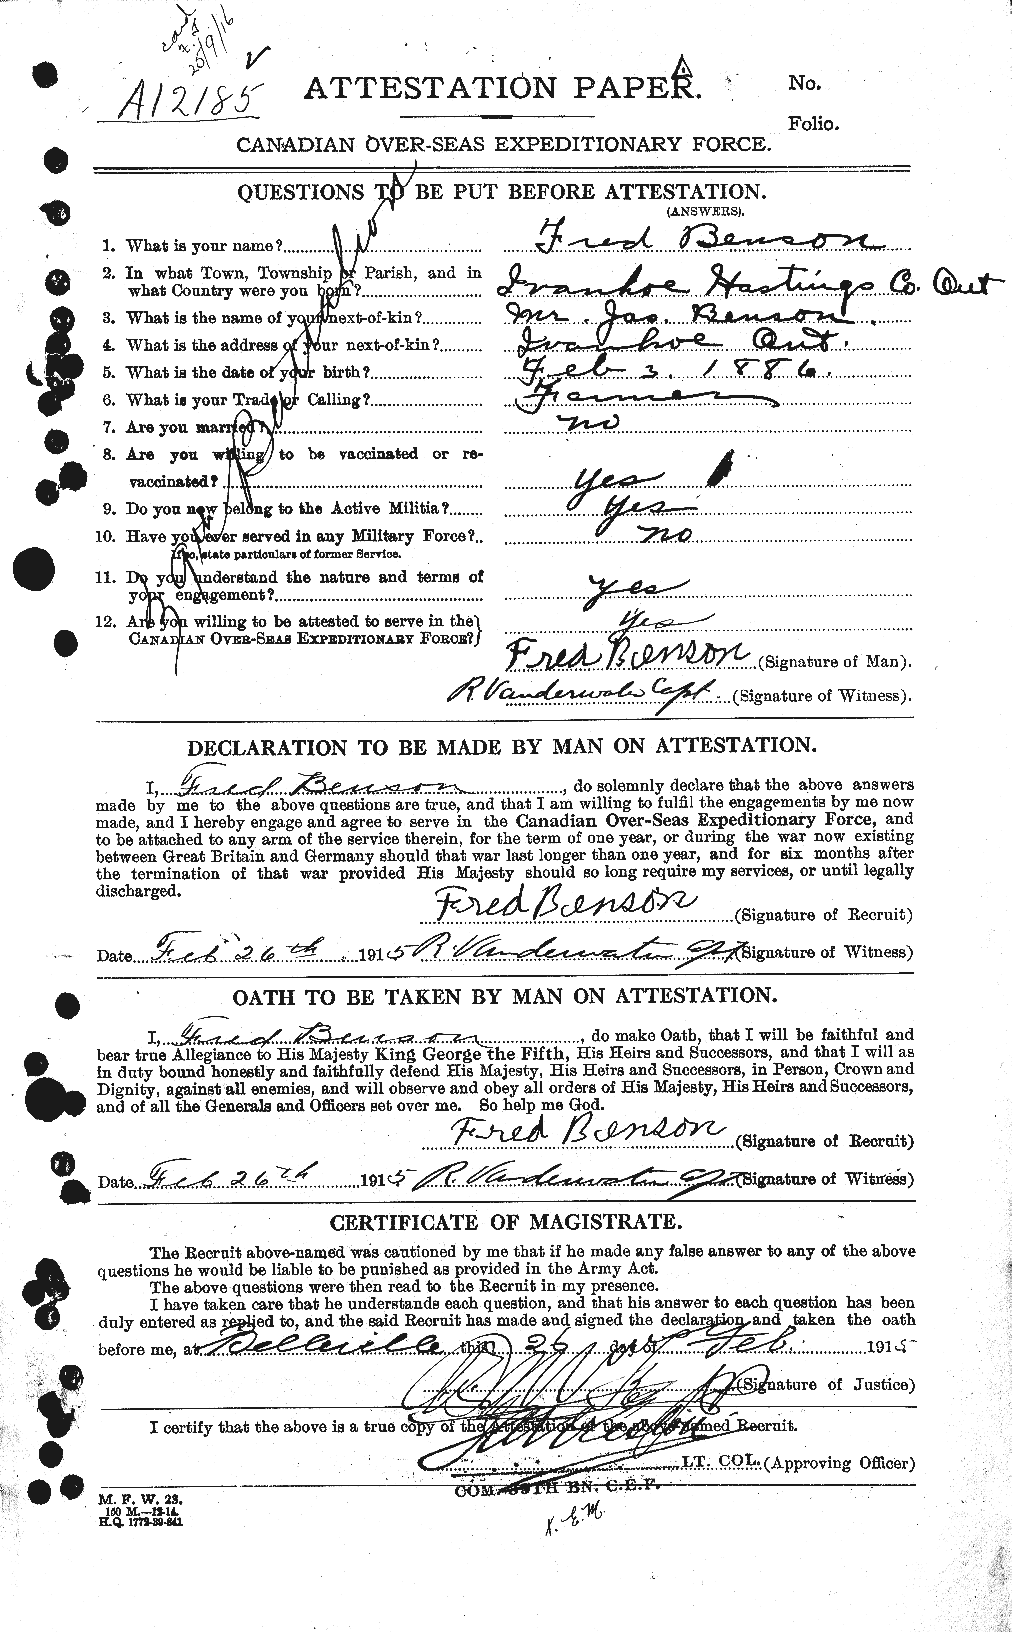 Personnel Records of the First World War - CEF 238313a